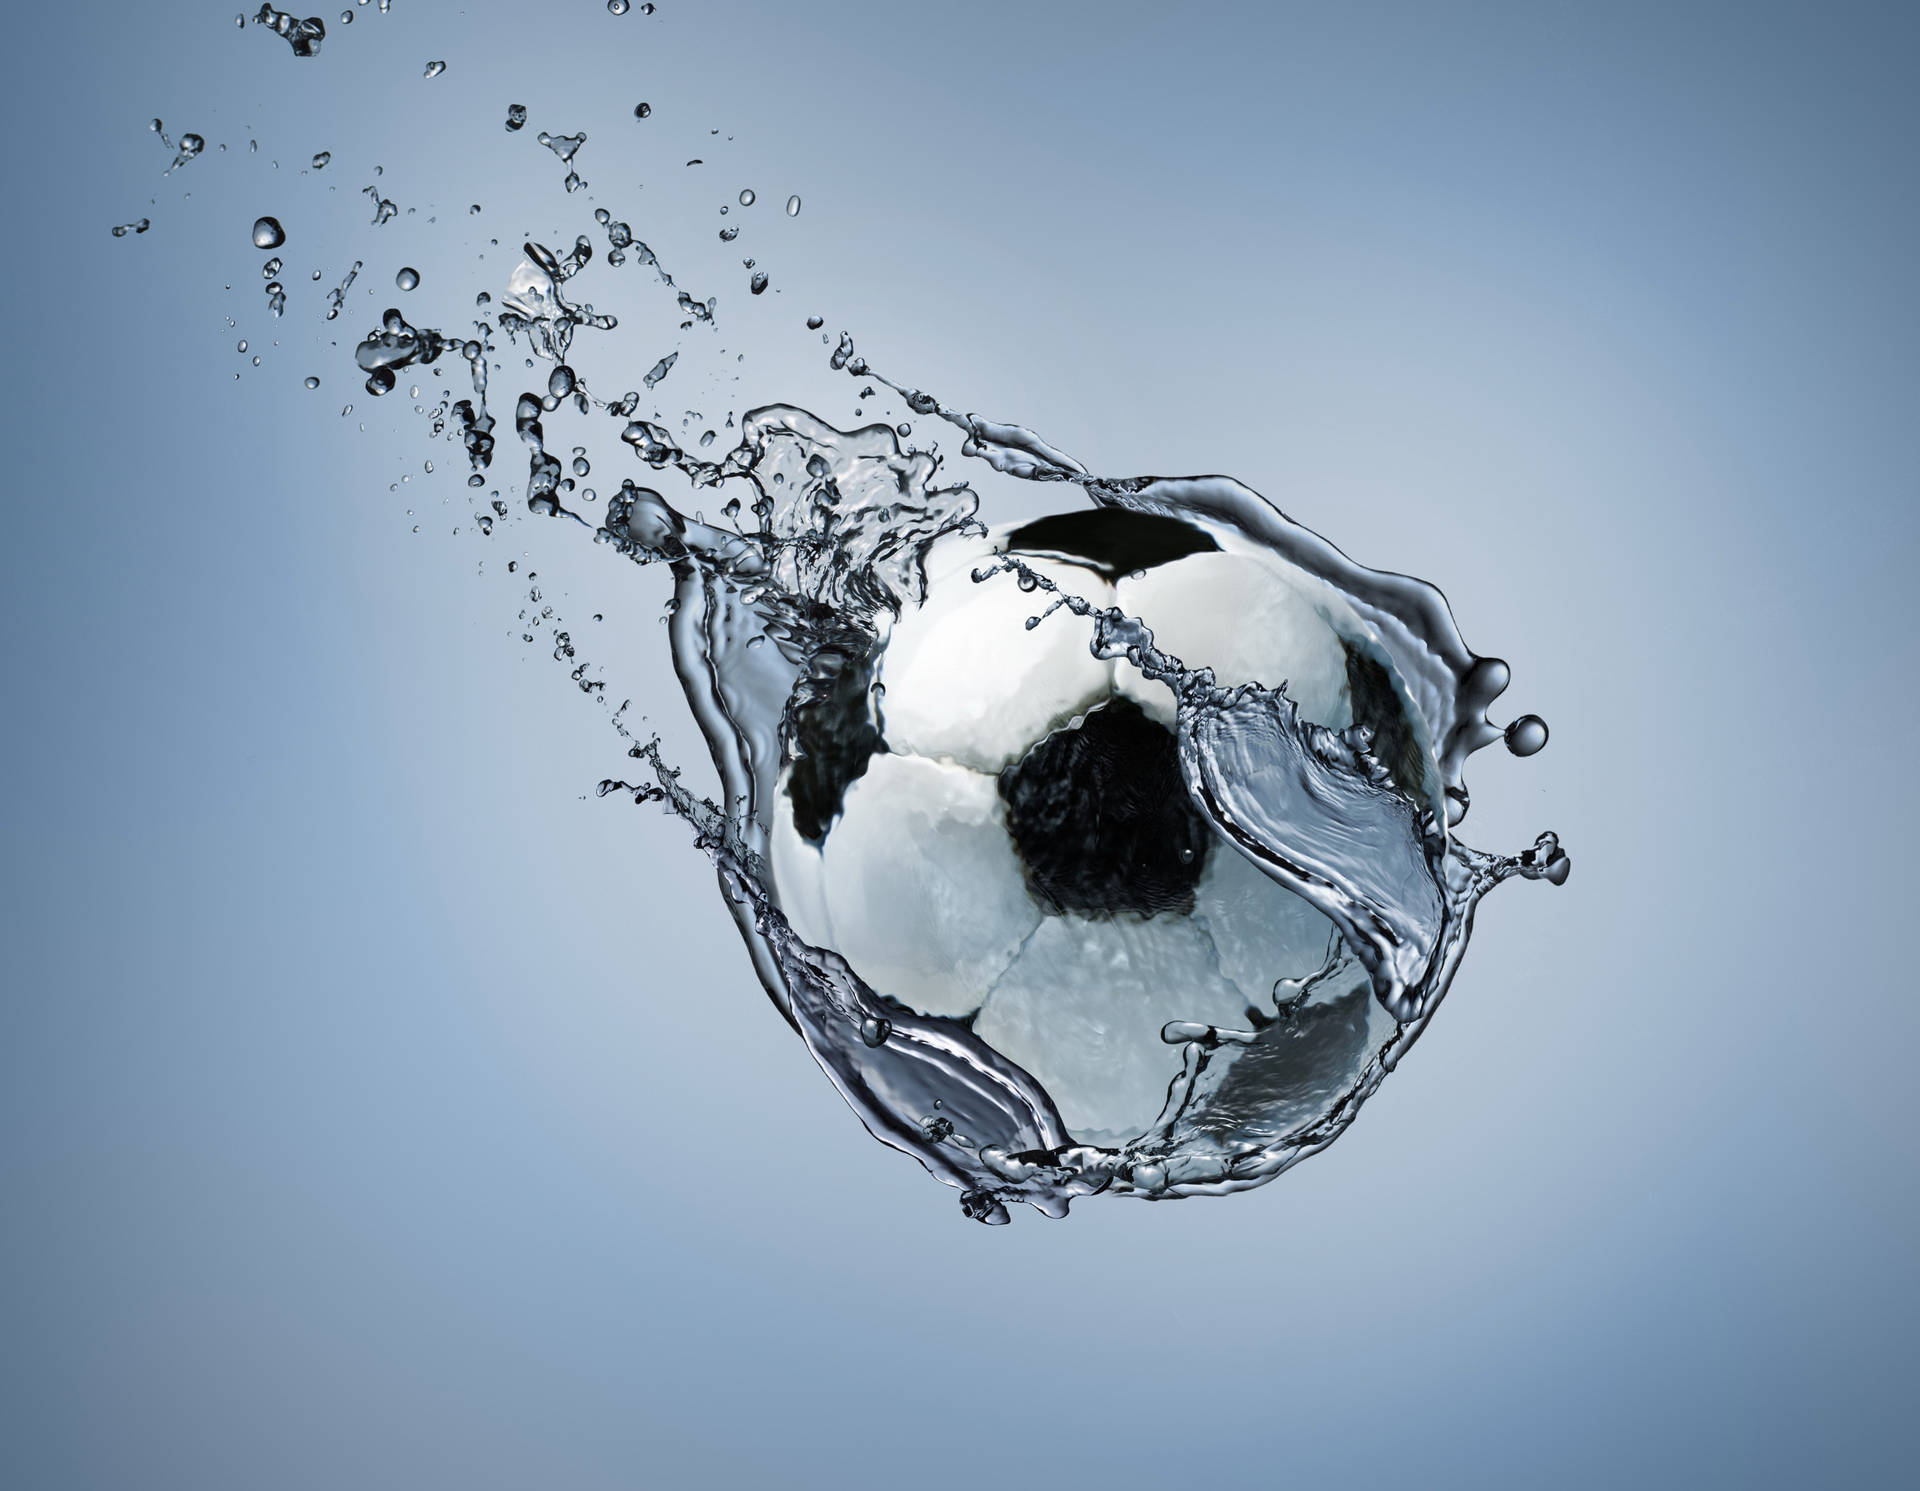 Free Football Wallpaper Downloads, [9200+] Football Wallpapers for FREE |  